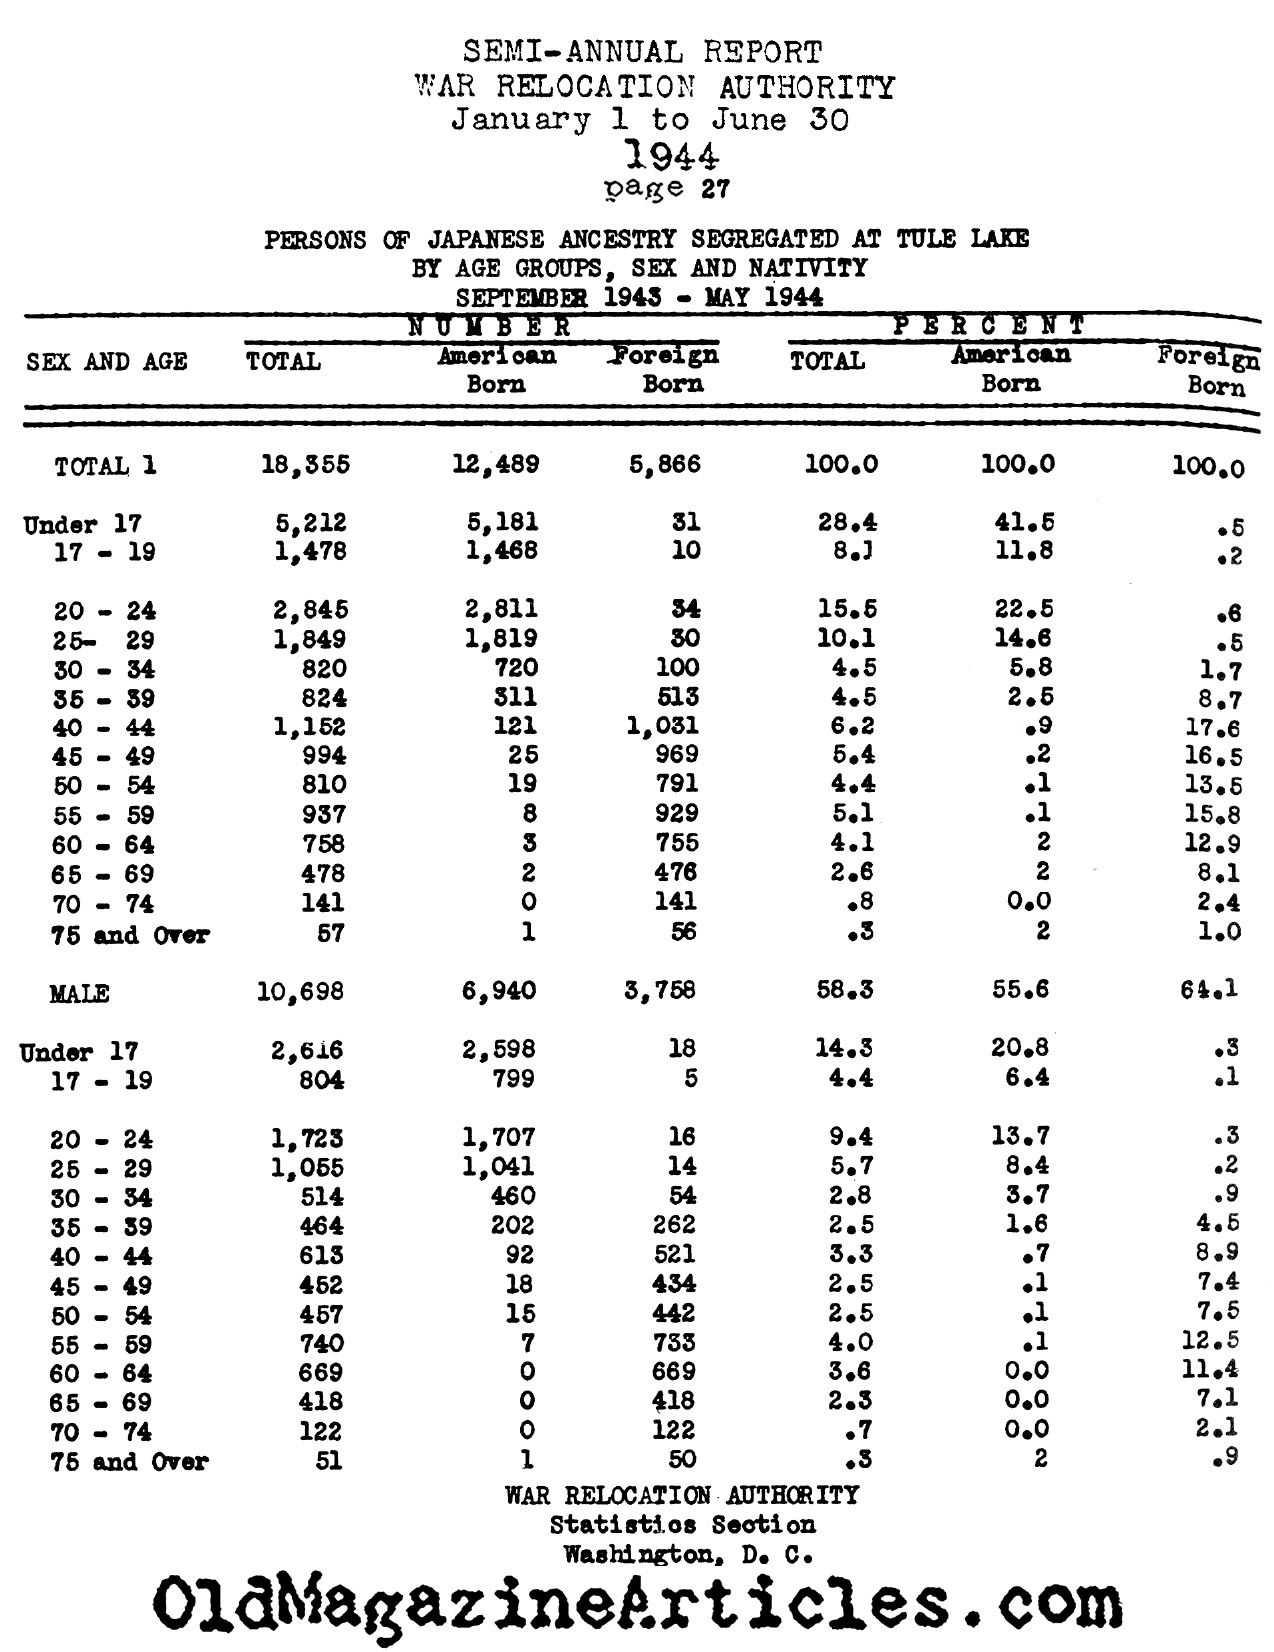 Tule Lake: How Many Women, How Many Men? (U.S. Government, 1944)